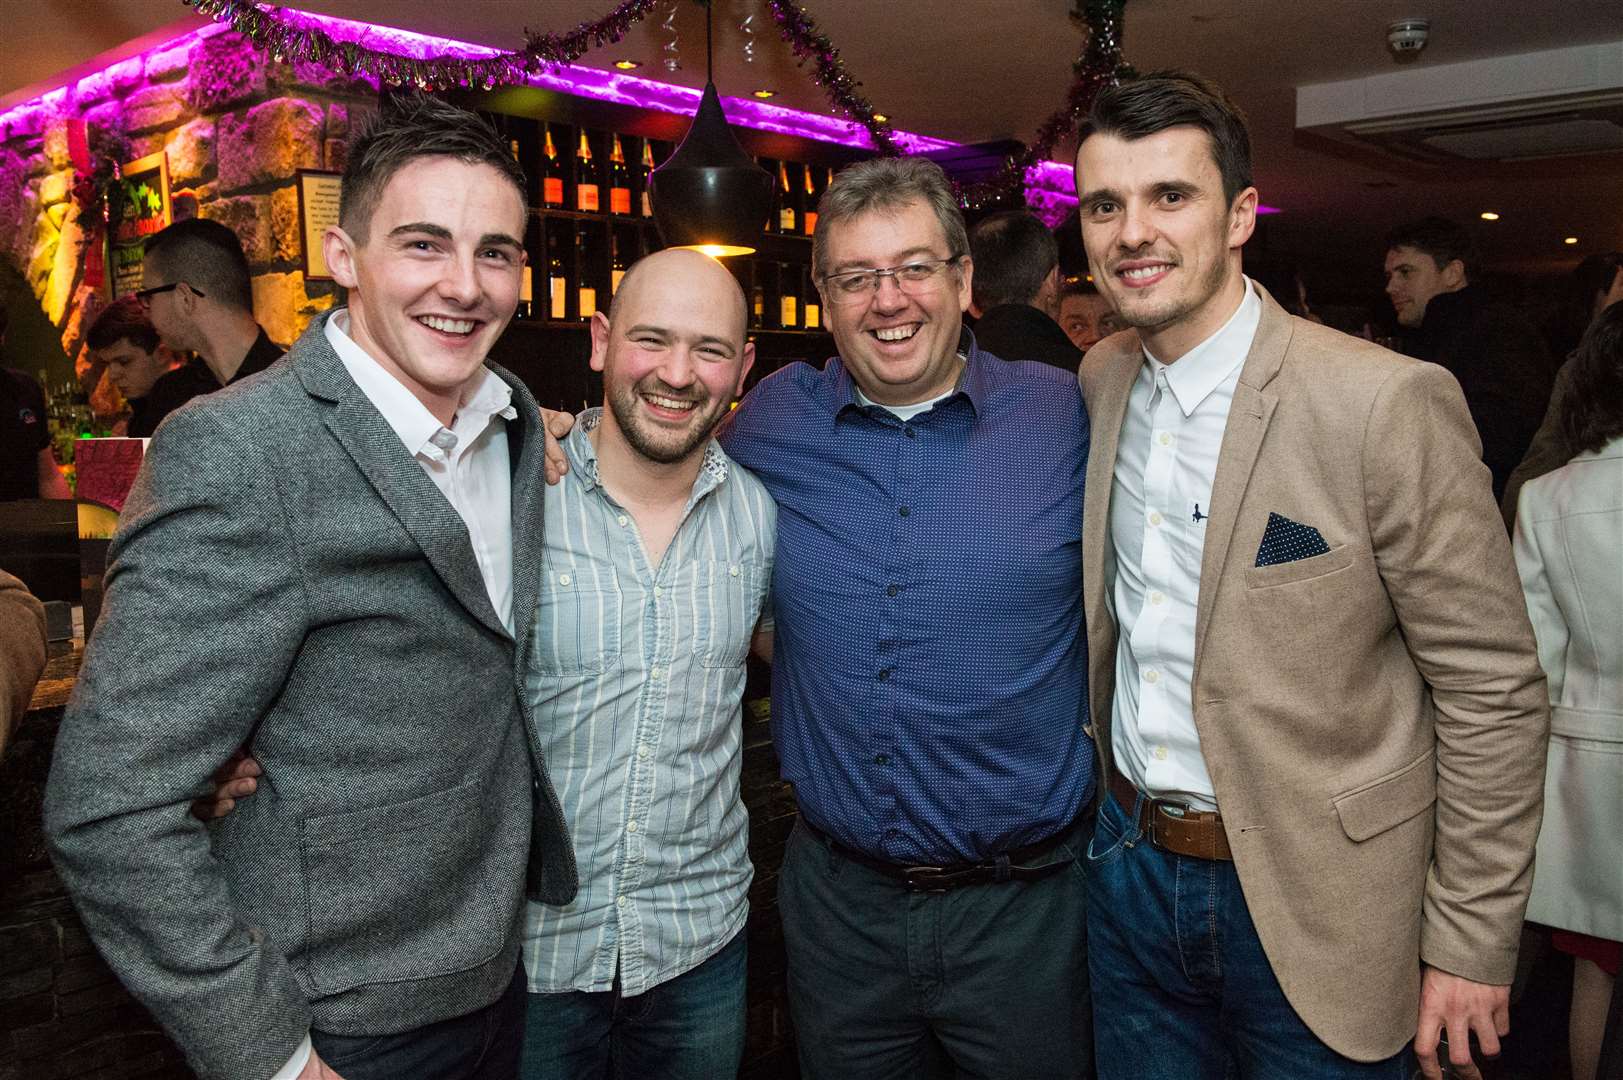 In the Den on Christmas night out are CRC Evens Offshore boys (l,r) Sean Macleod, Gordon Daly, Scott Black and Steven Mackay.